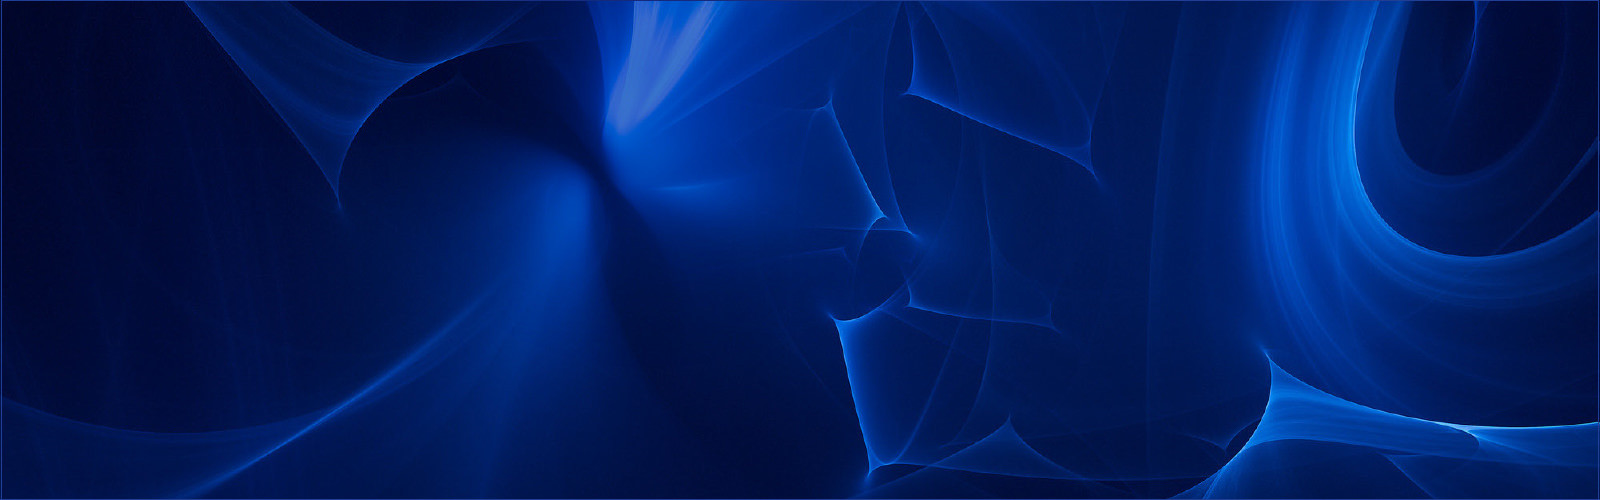 An abstract design in blue